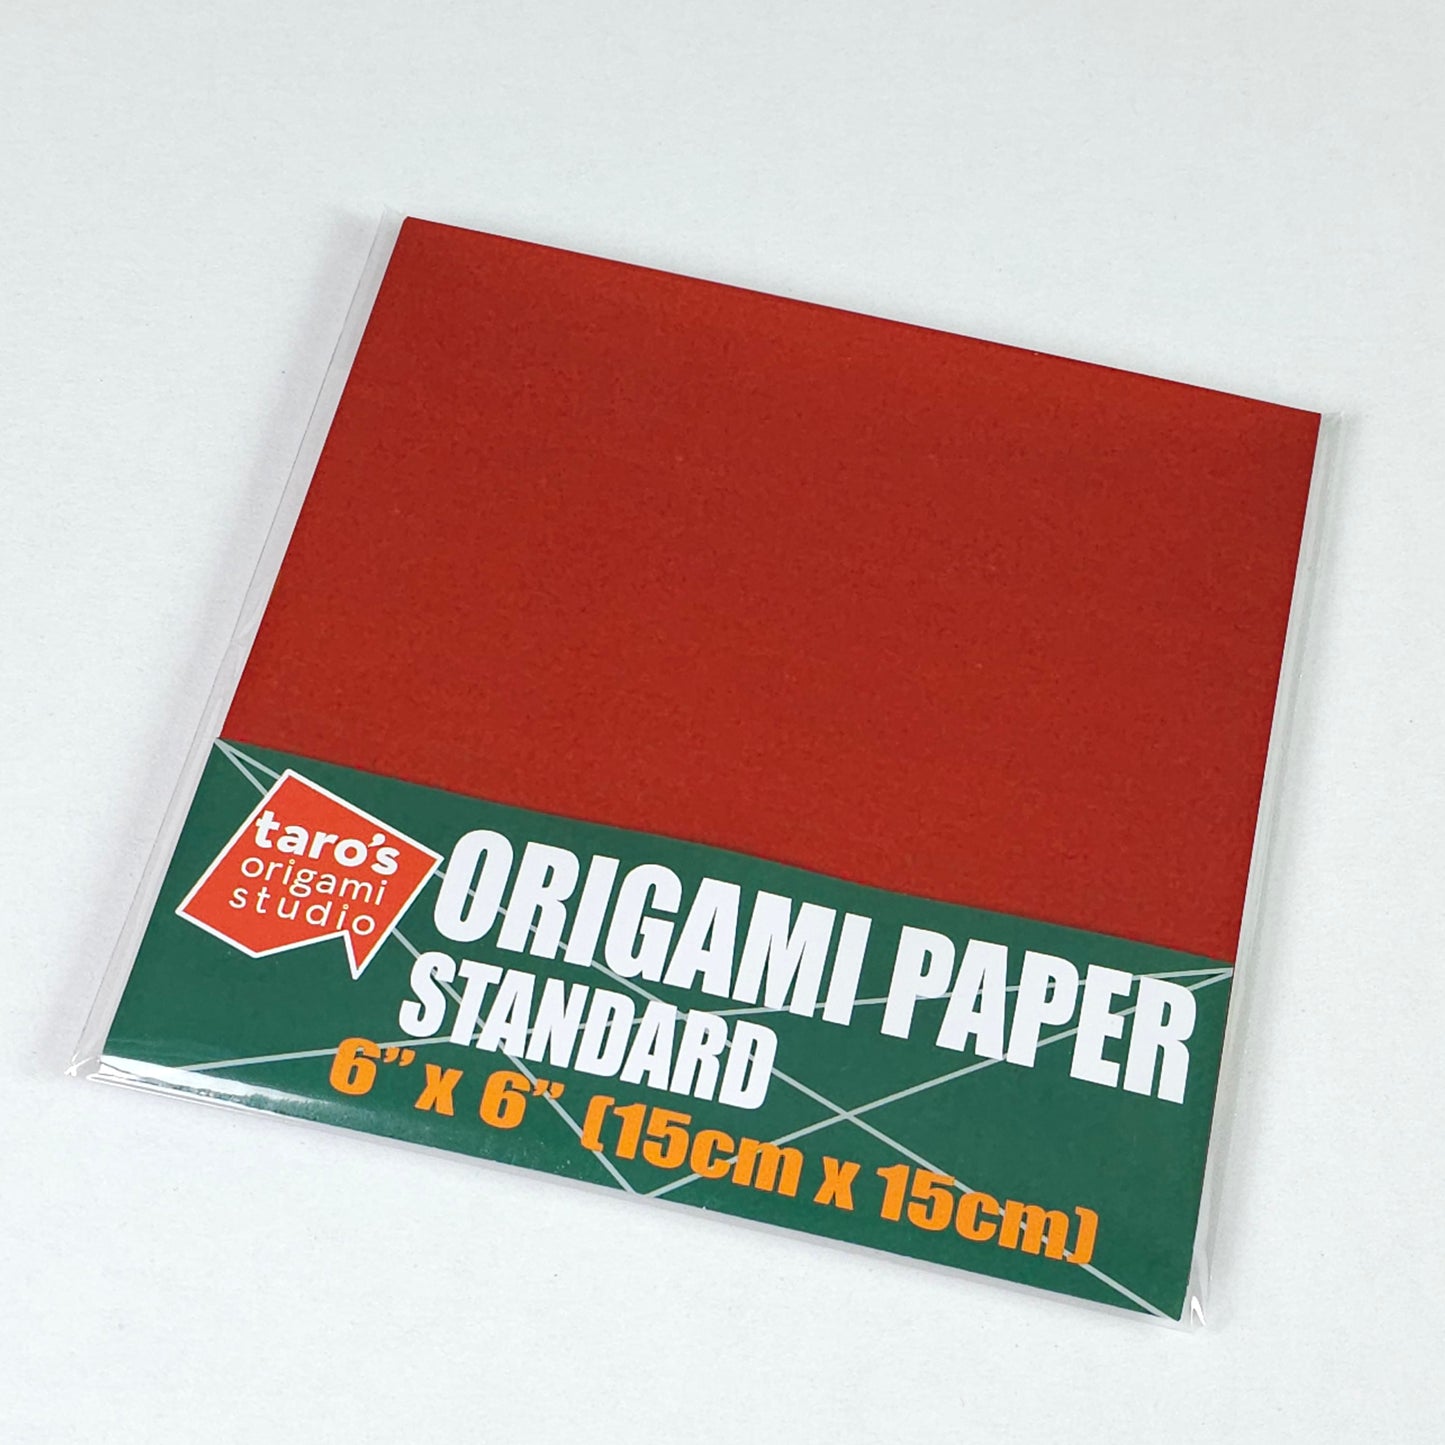 Standard 6 Inch One Sided Single Color (Brown) 50 Sheets (All Same Color) Square Easy Fold Premium Japanese Paper for Beginner (Made in Japan)